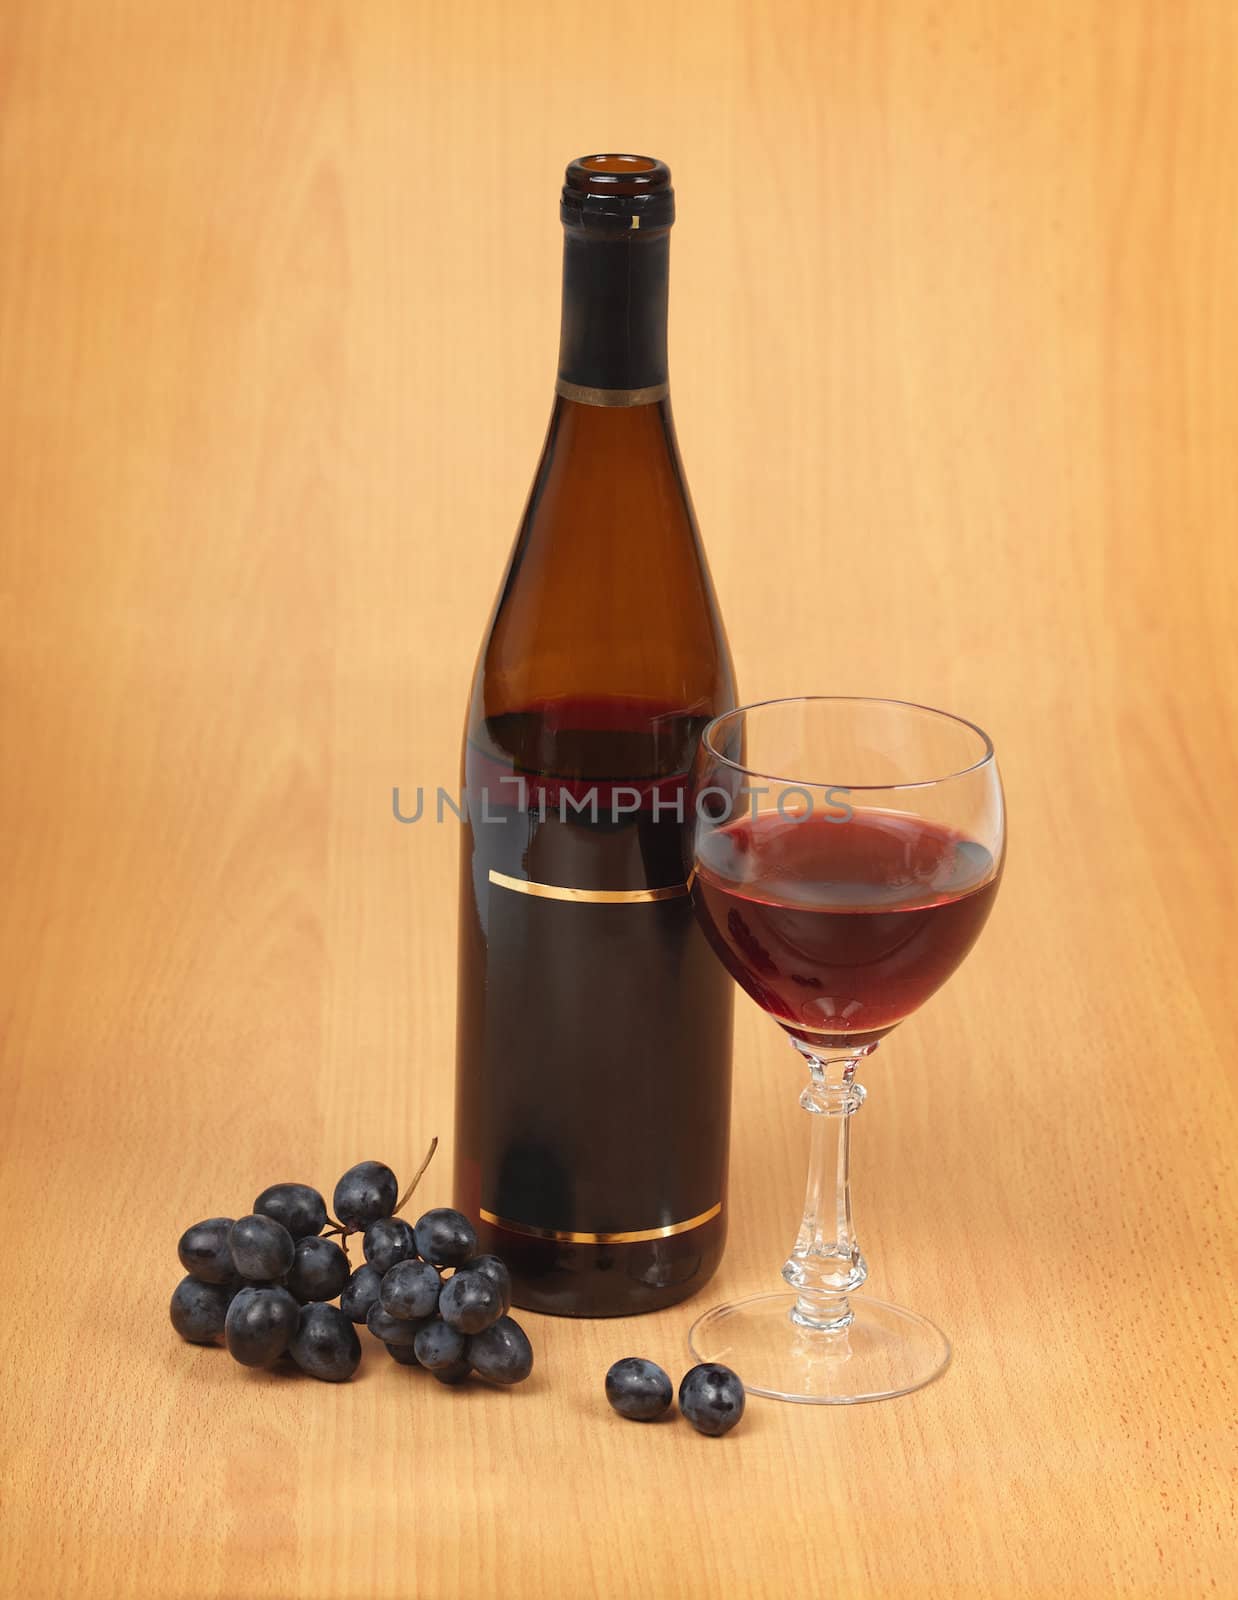 Bottle, wine glass and grapes on wood background